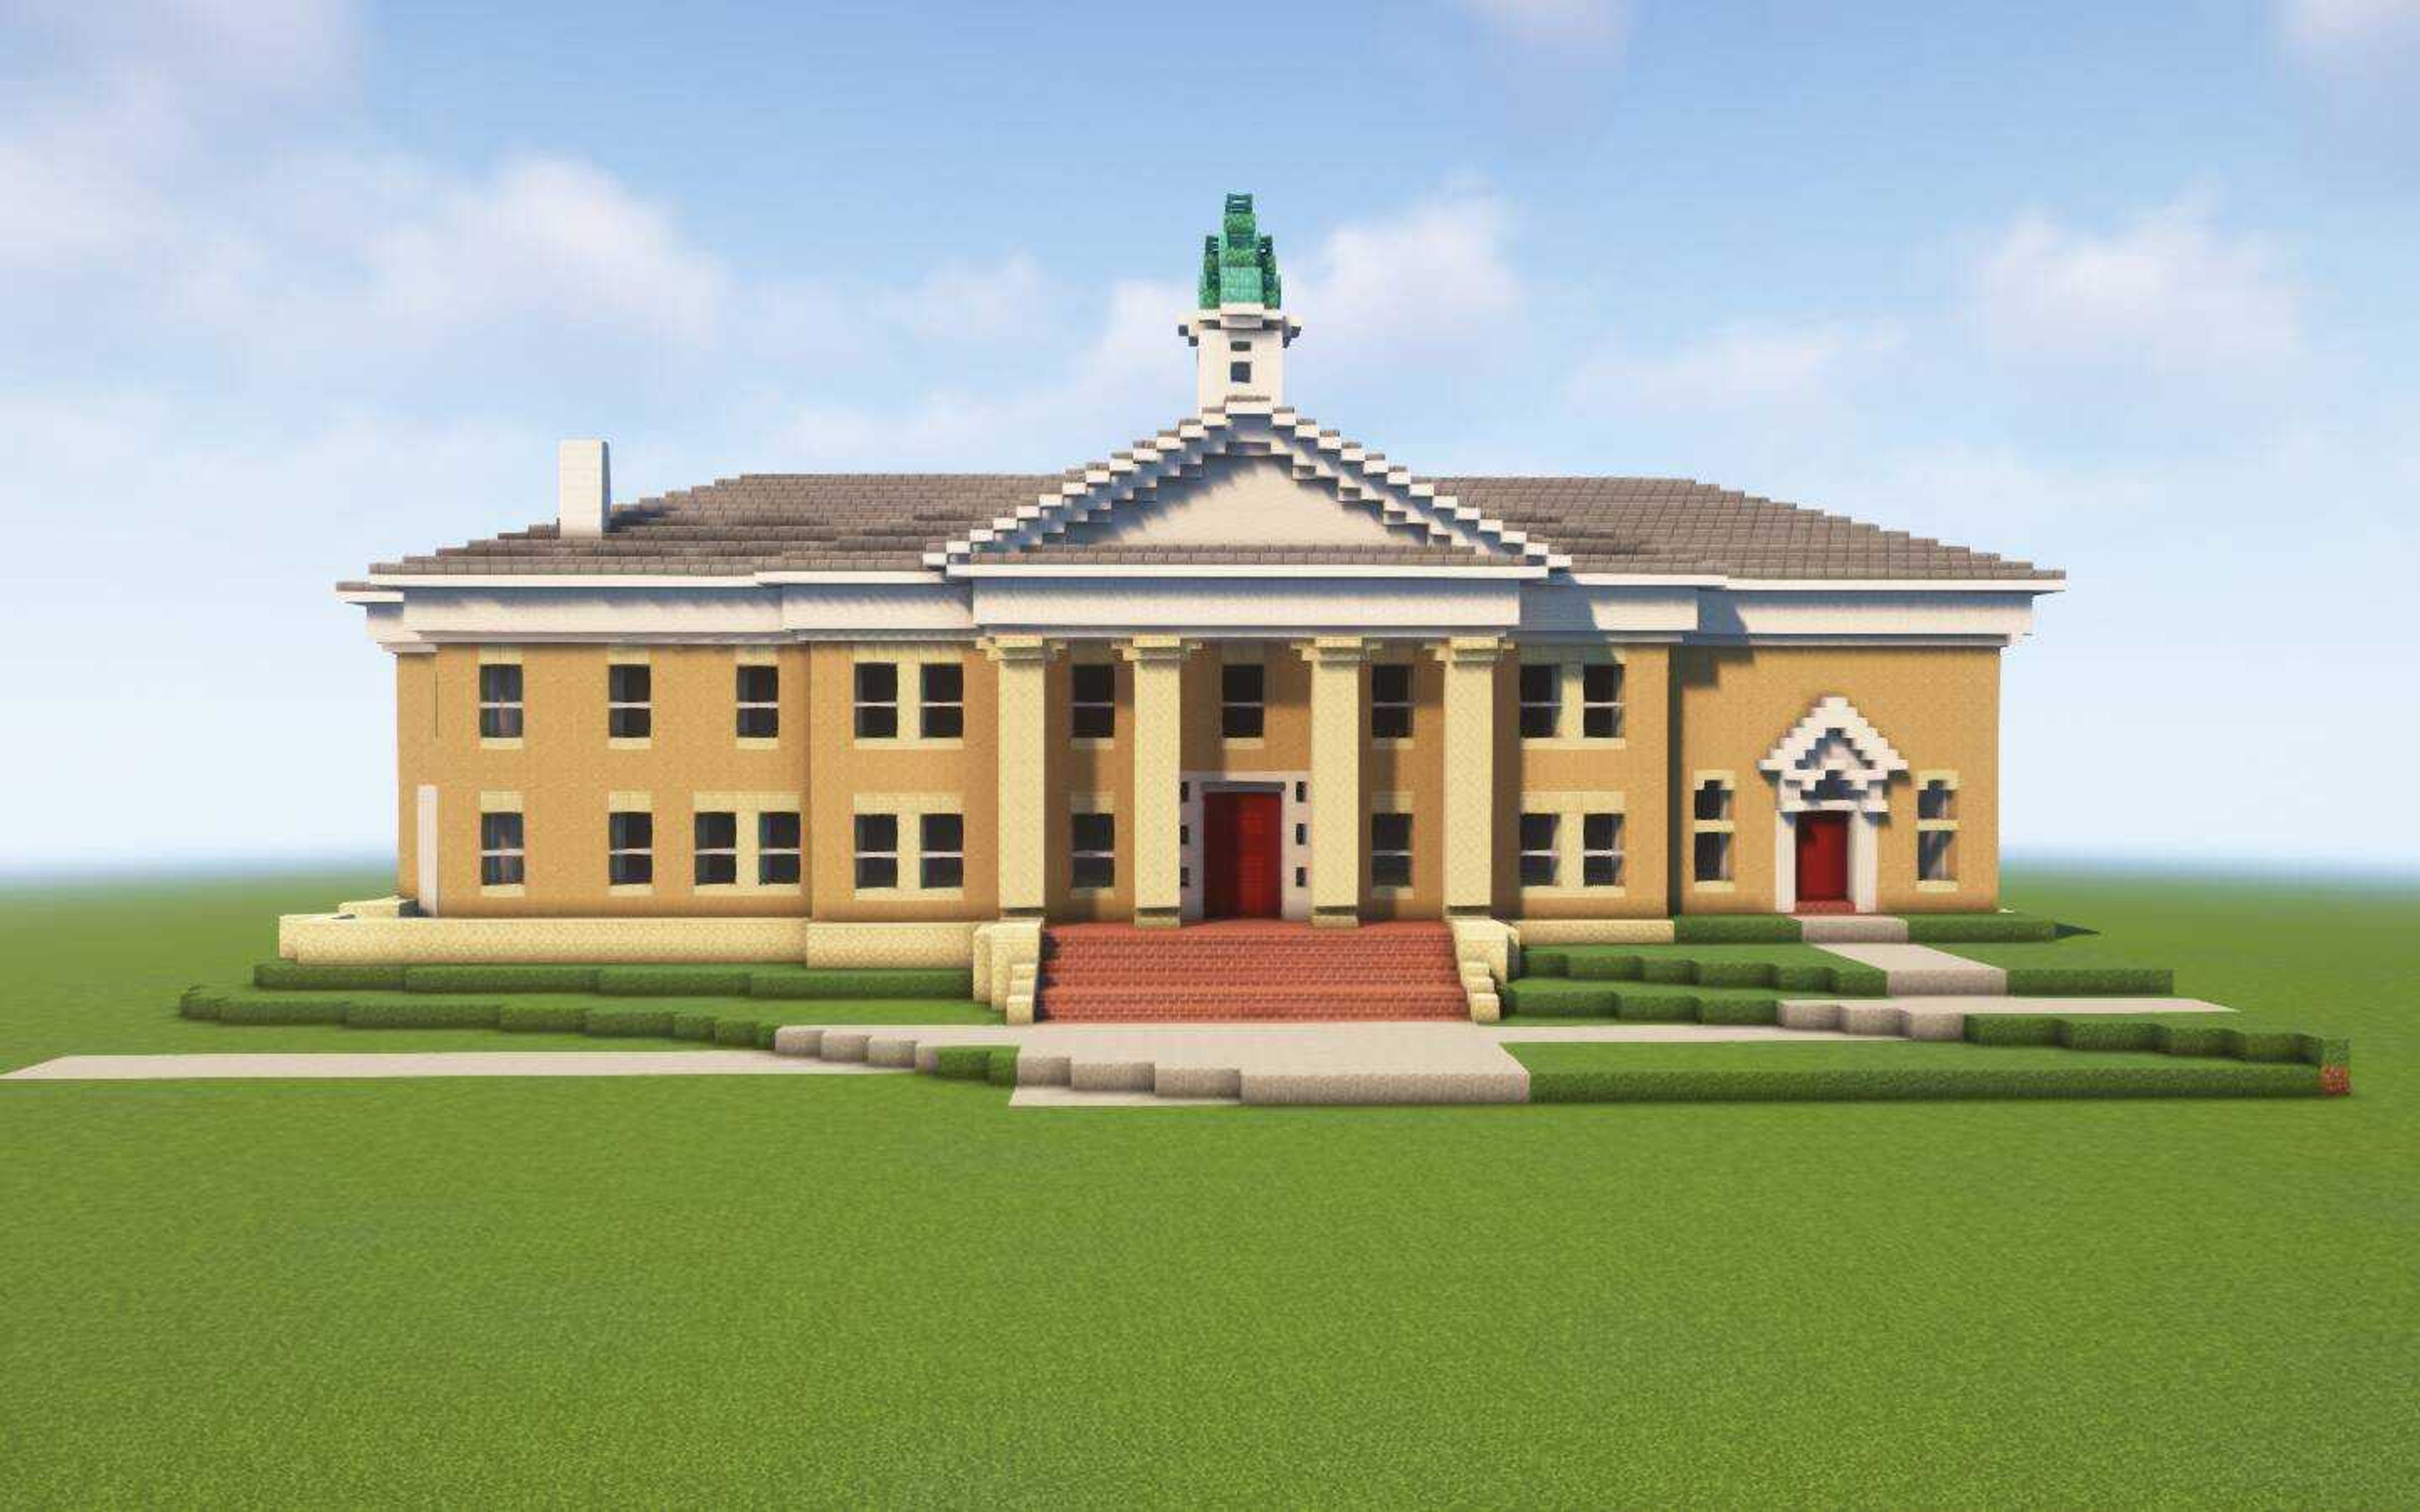 The original recreation of the Baptist Student Center by Claire Humes in May of 2021. Humes was challenged to build this structure by her peers in Game Club.